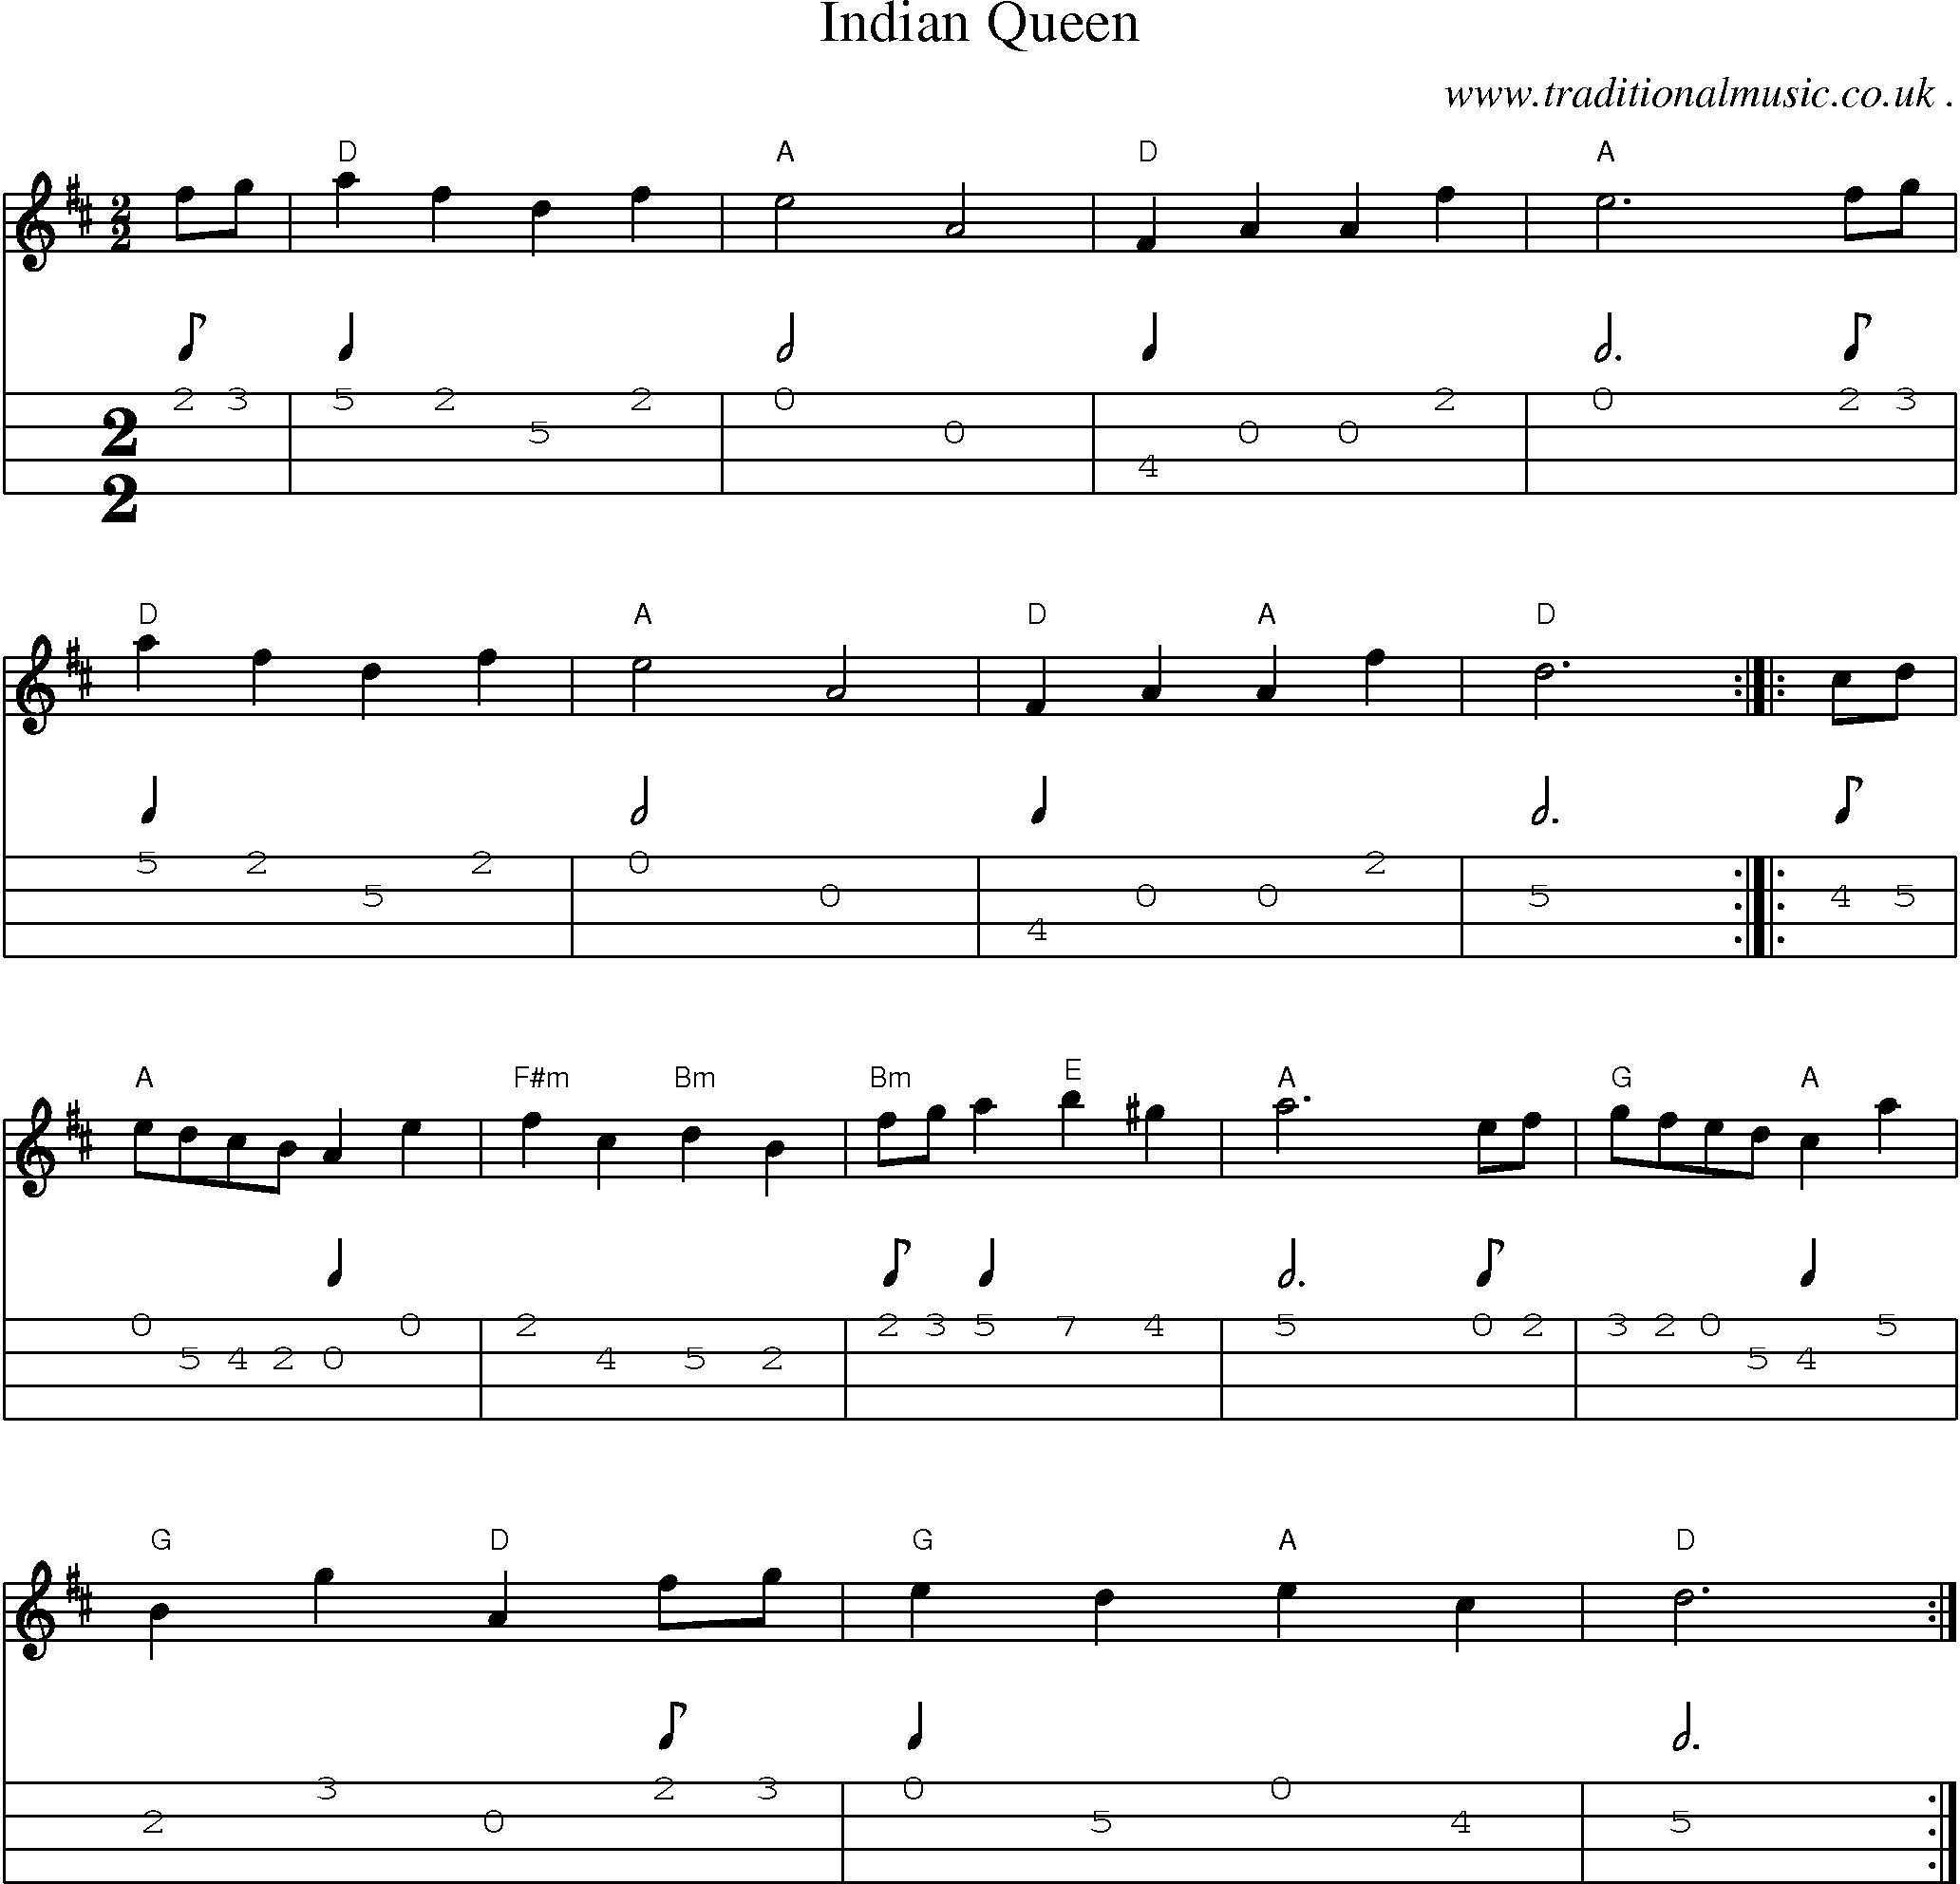 Music Score and Mandolin Tabs for Indian Queen